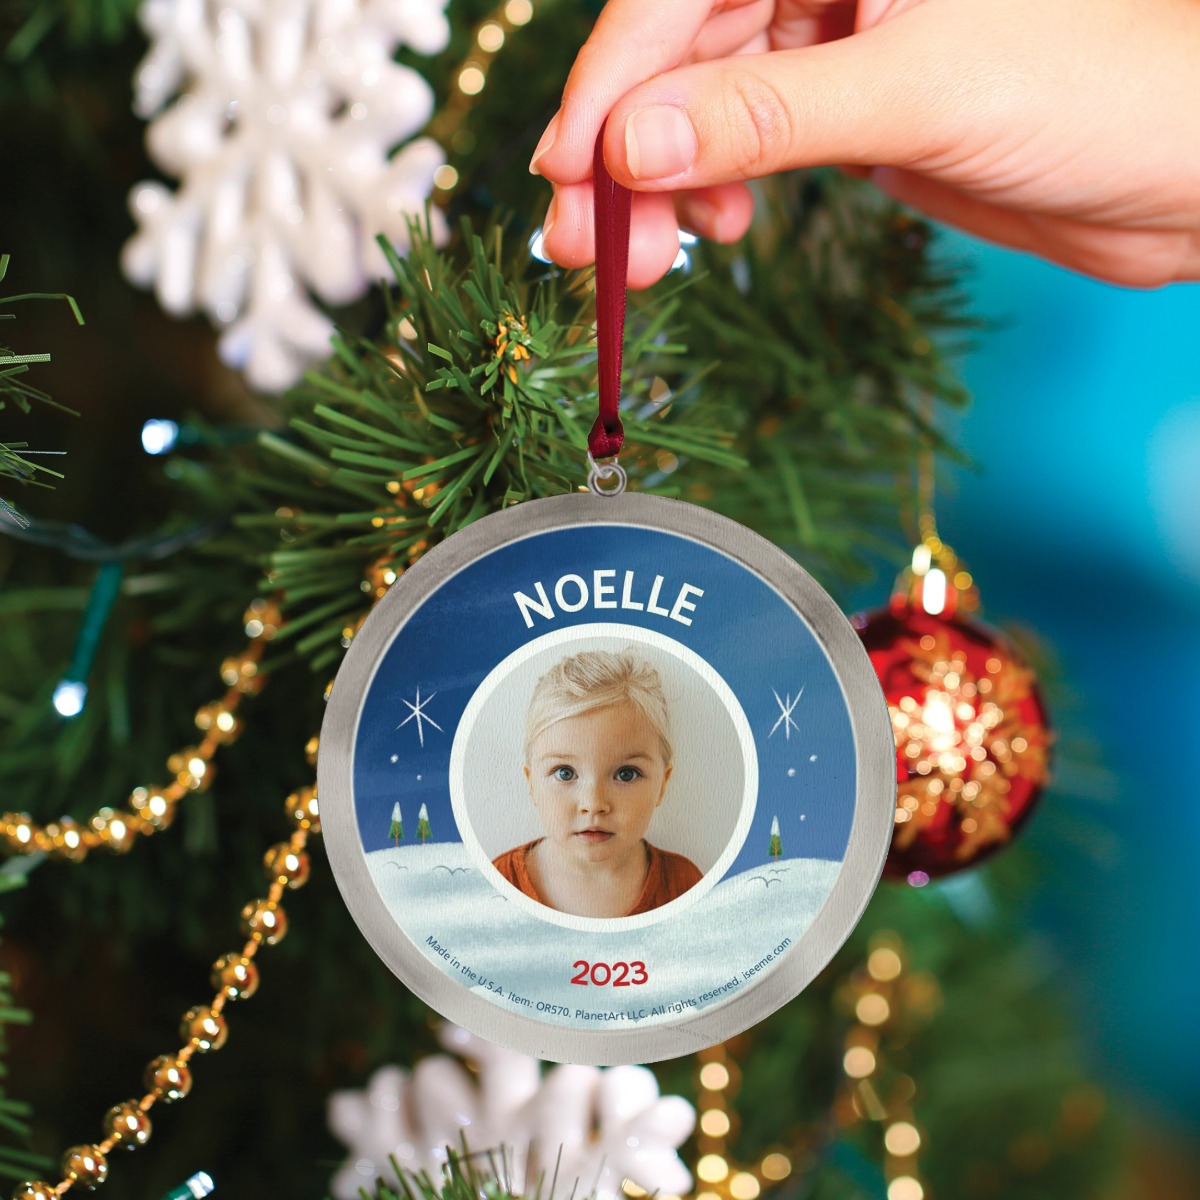 My Christmas Sing-Along Personalized Book and Ornament Gift Set